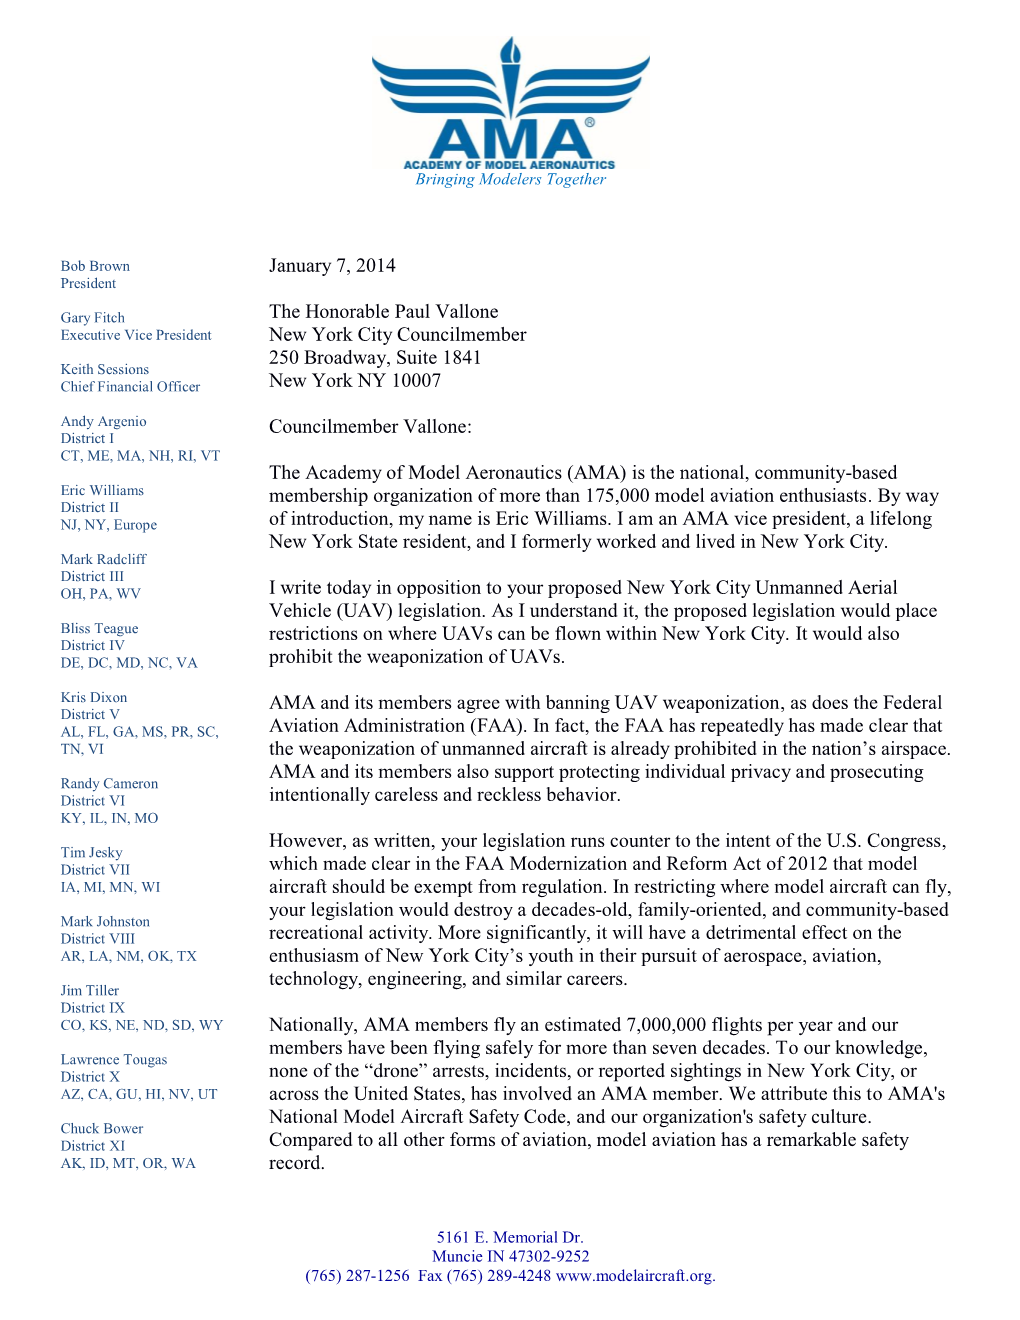 AMA Letter to the Honorable Paul Vallone, New York City